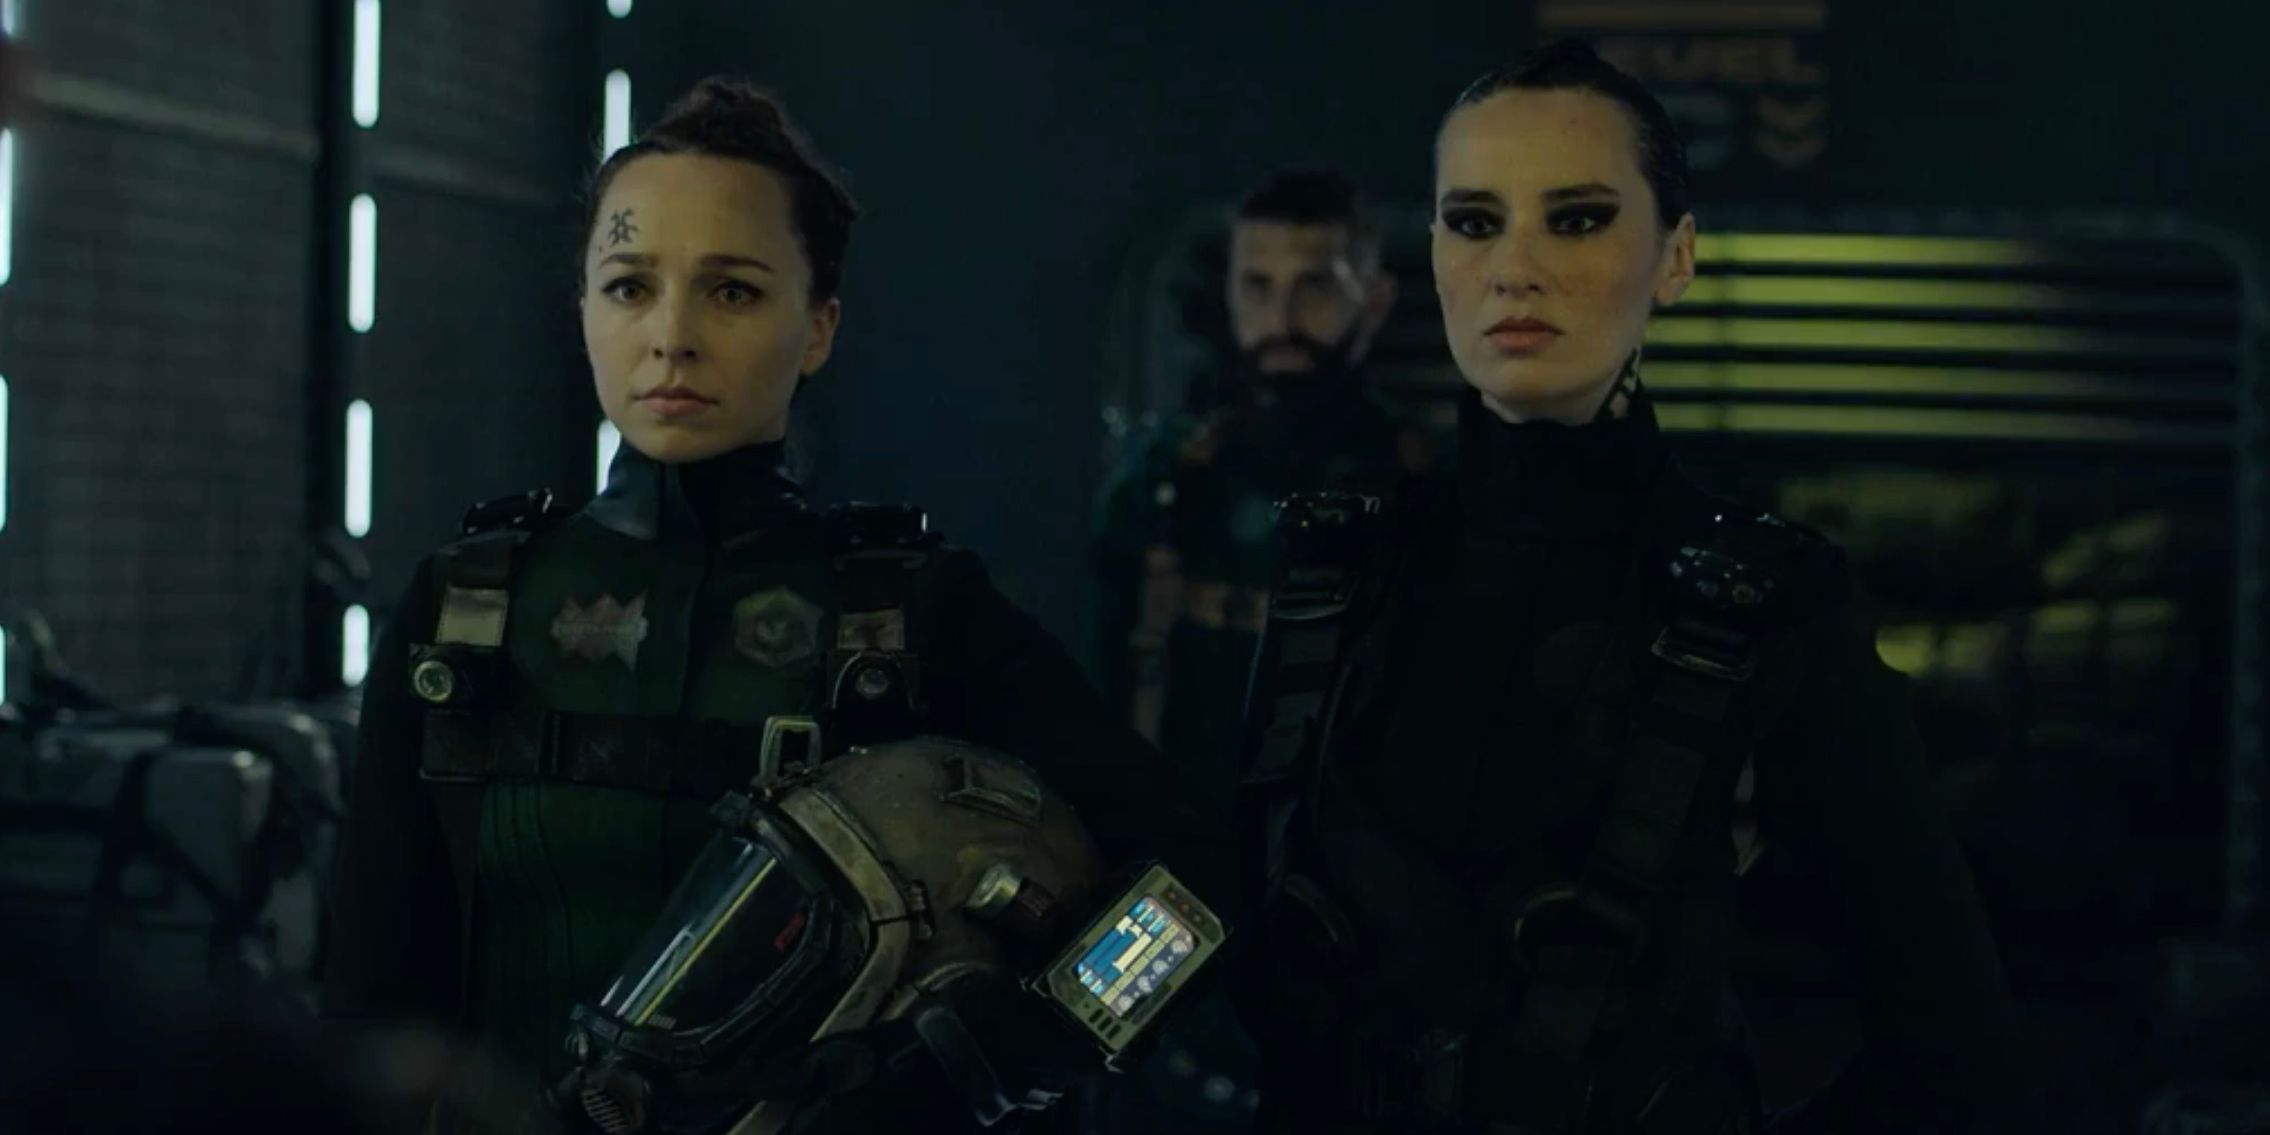 The Expanse season 6 michio and Drummer